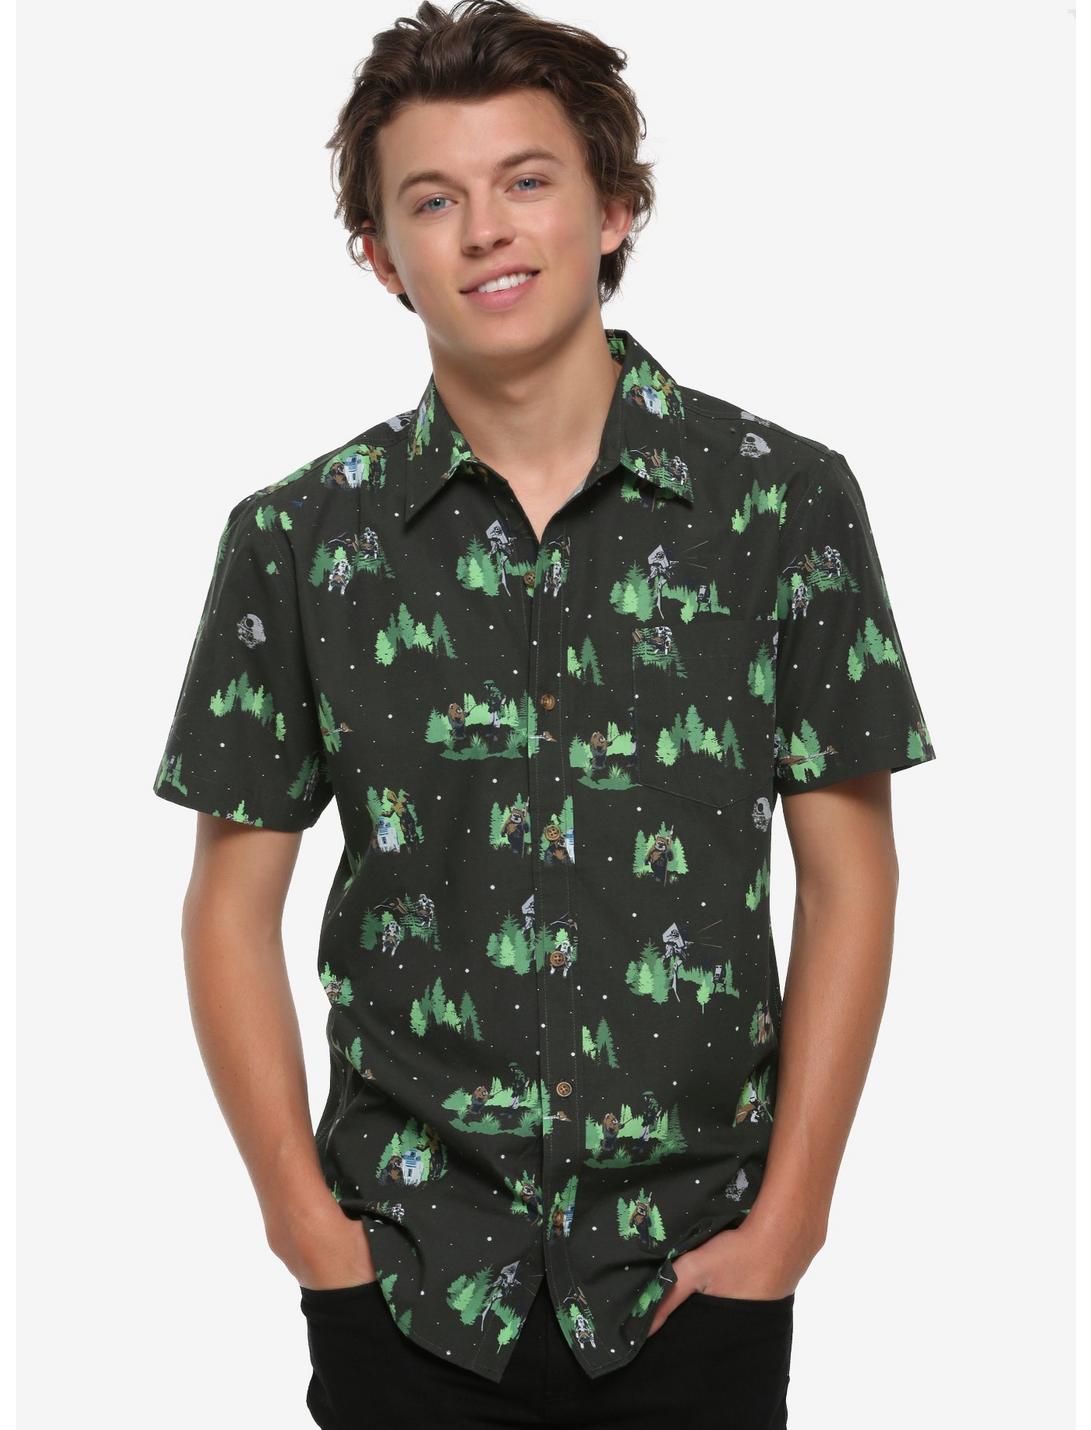 Our Universe Star Wars Forest Moon Of Endor Short-Sleeve Woven Button-Up, MULTI, hi-res